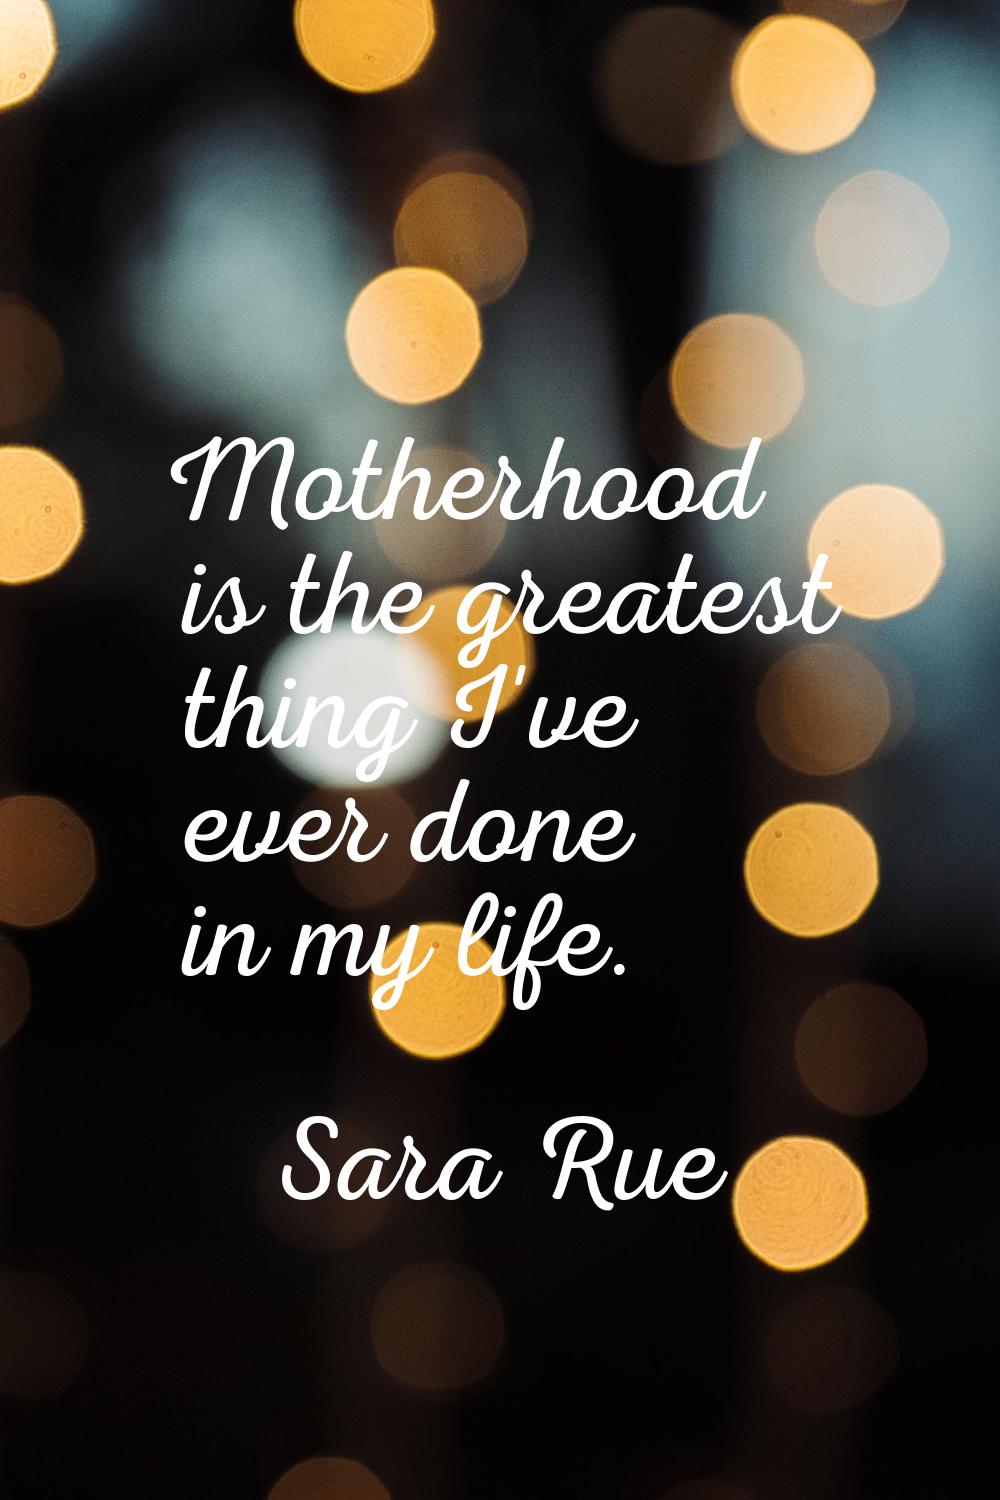 Motherhood is the greatest thing I've ever done in my life.